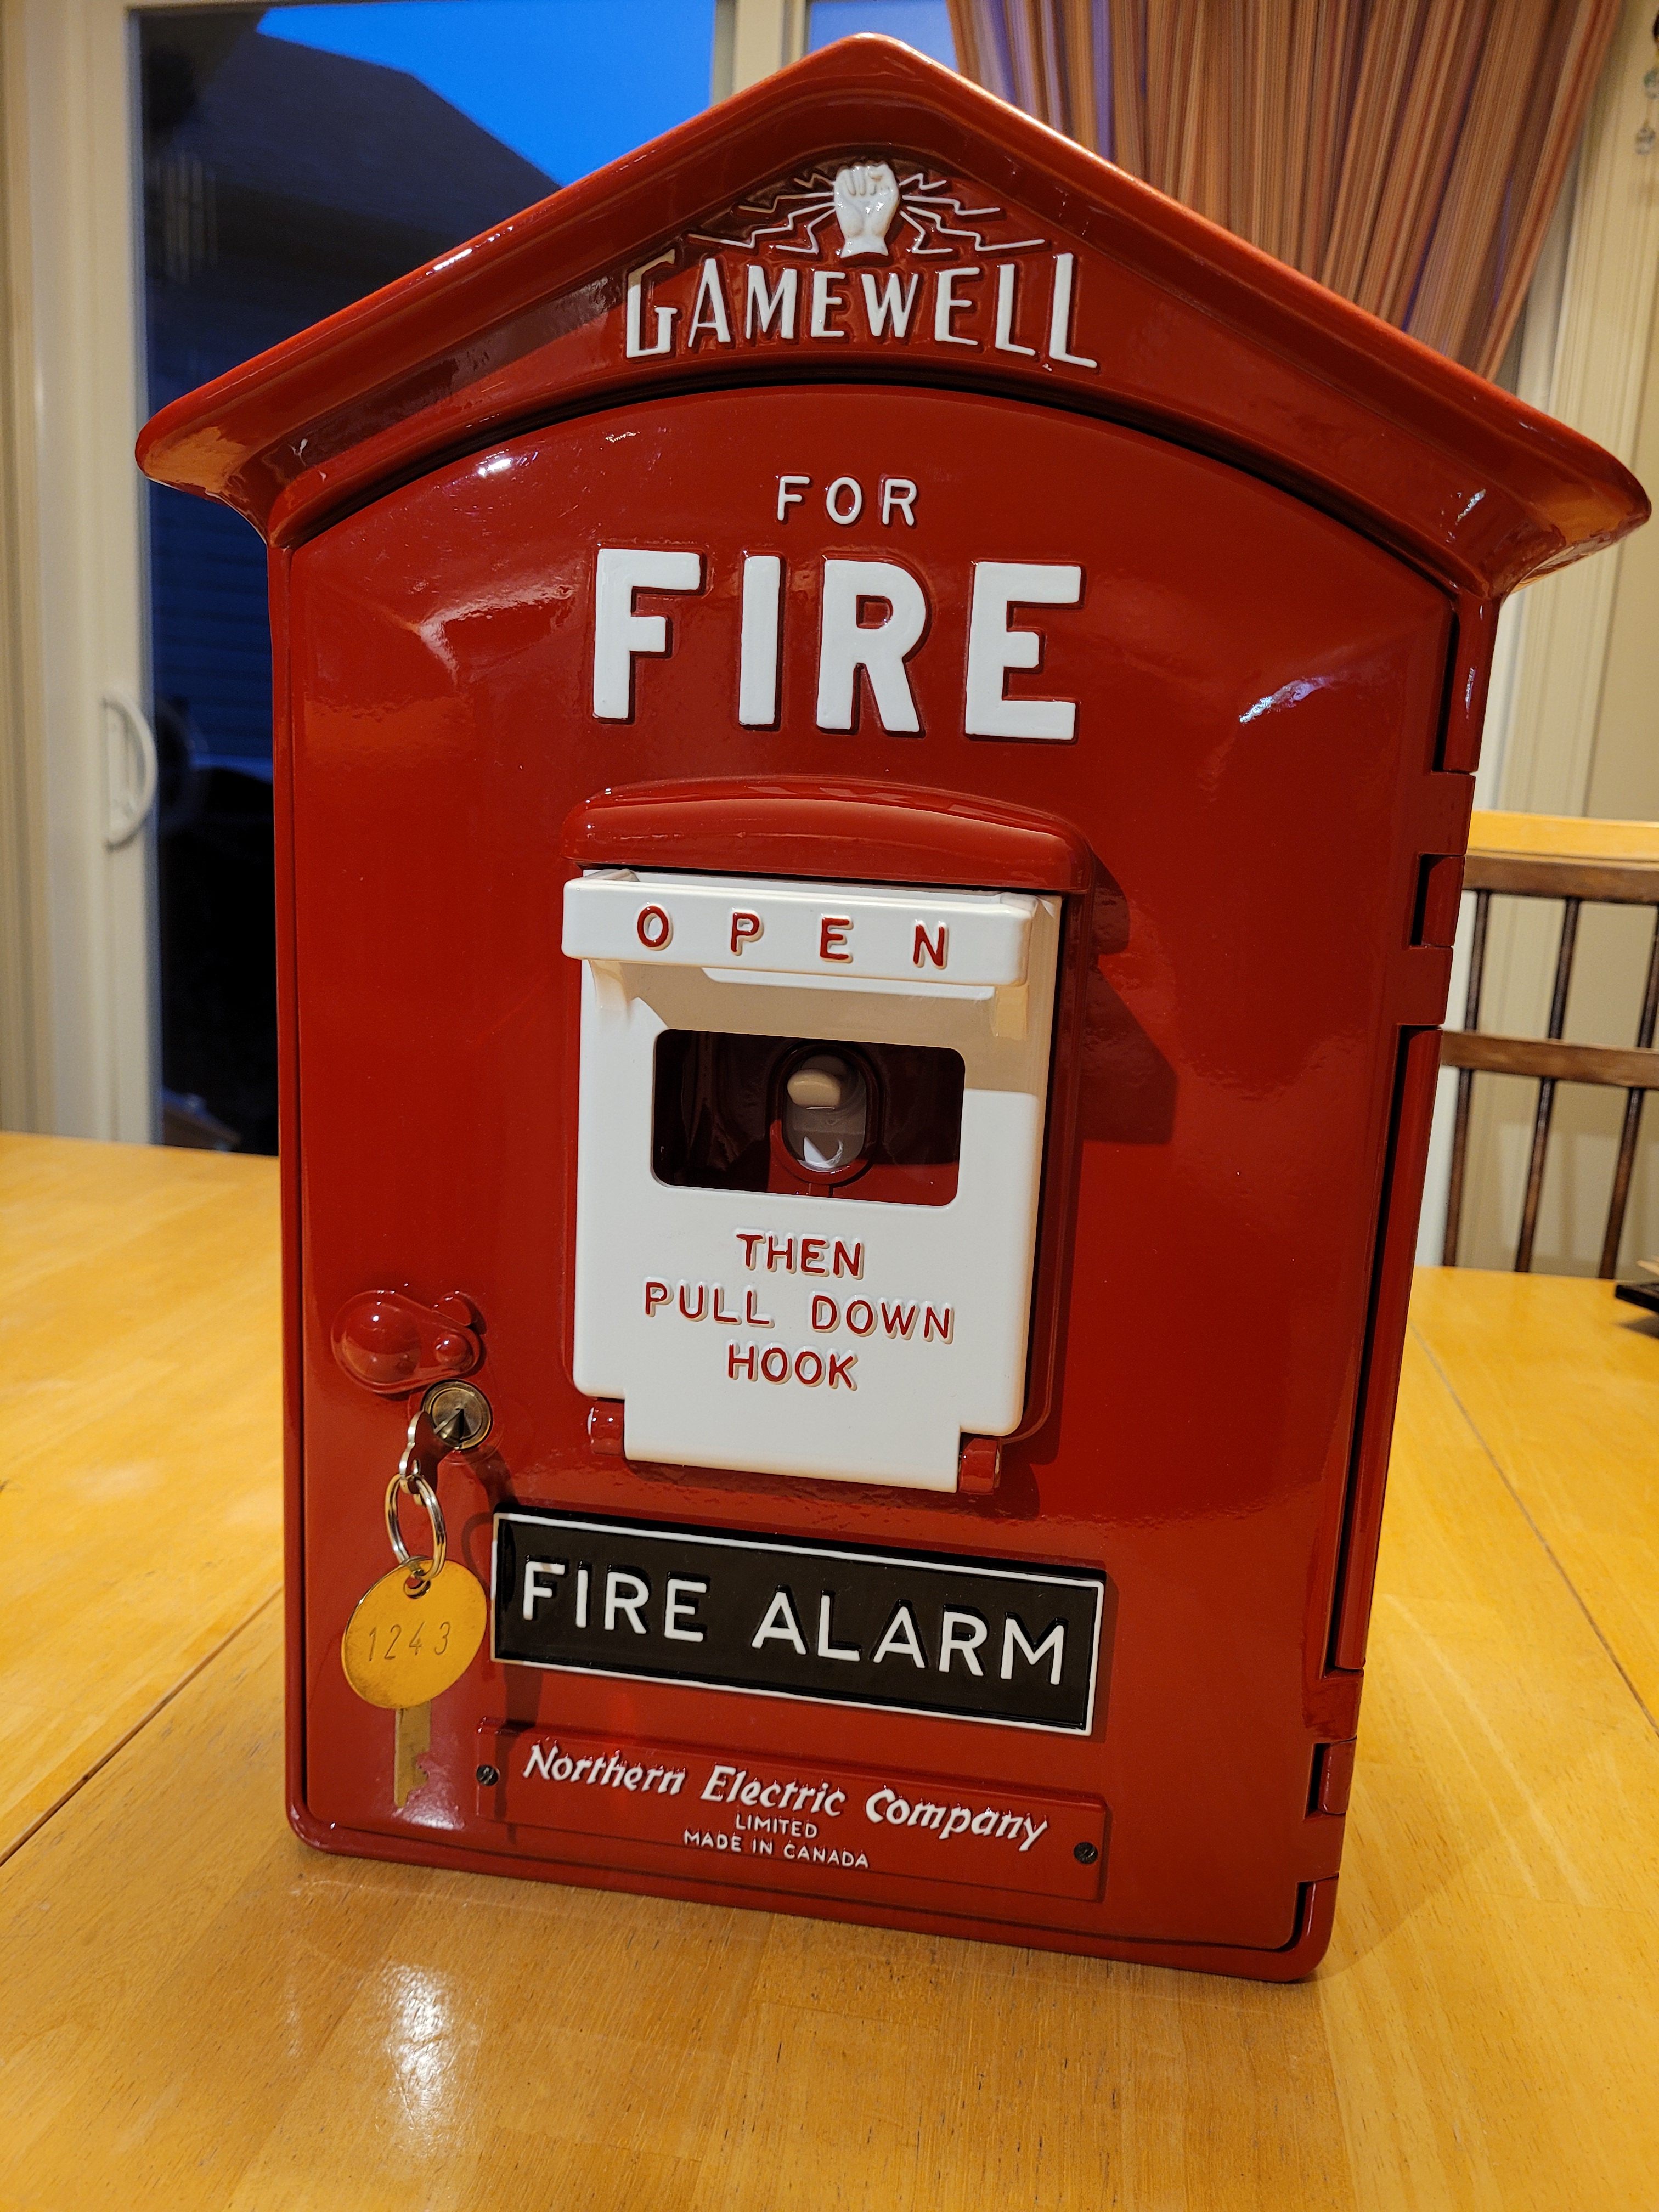 As good as new; this Gamewell fire alarm box from the Northern Electric Company can  be enjoyed for years to come